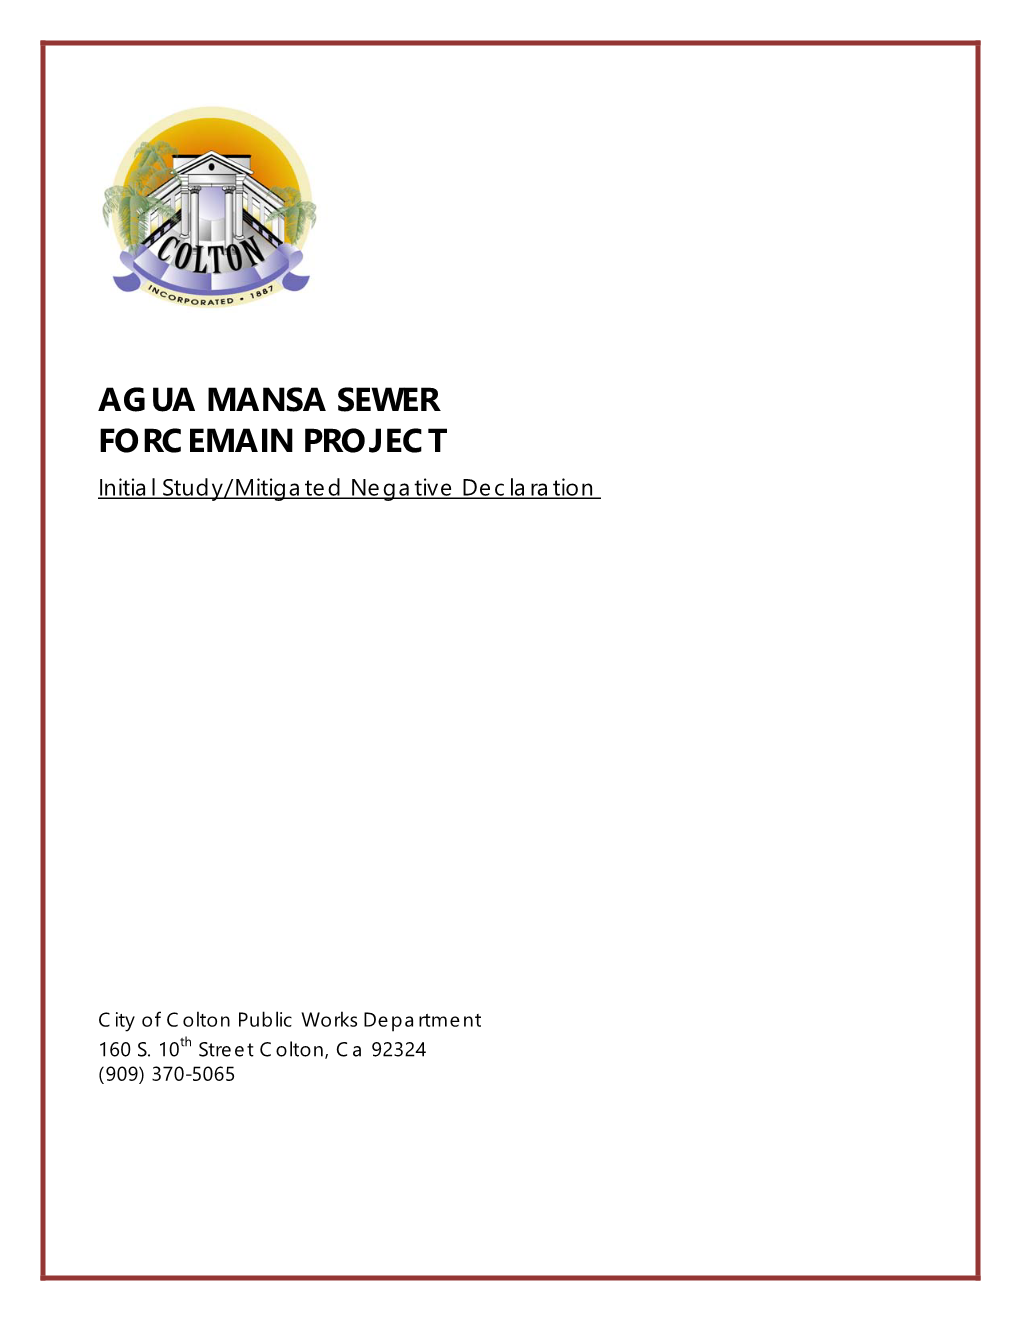 AGUA MANSA SEWER FORCEMAIN PROJECT Initial Study/Mitigated Negative Declaration